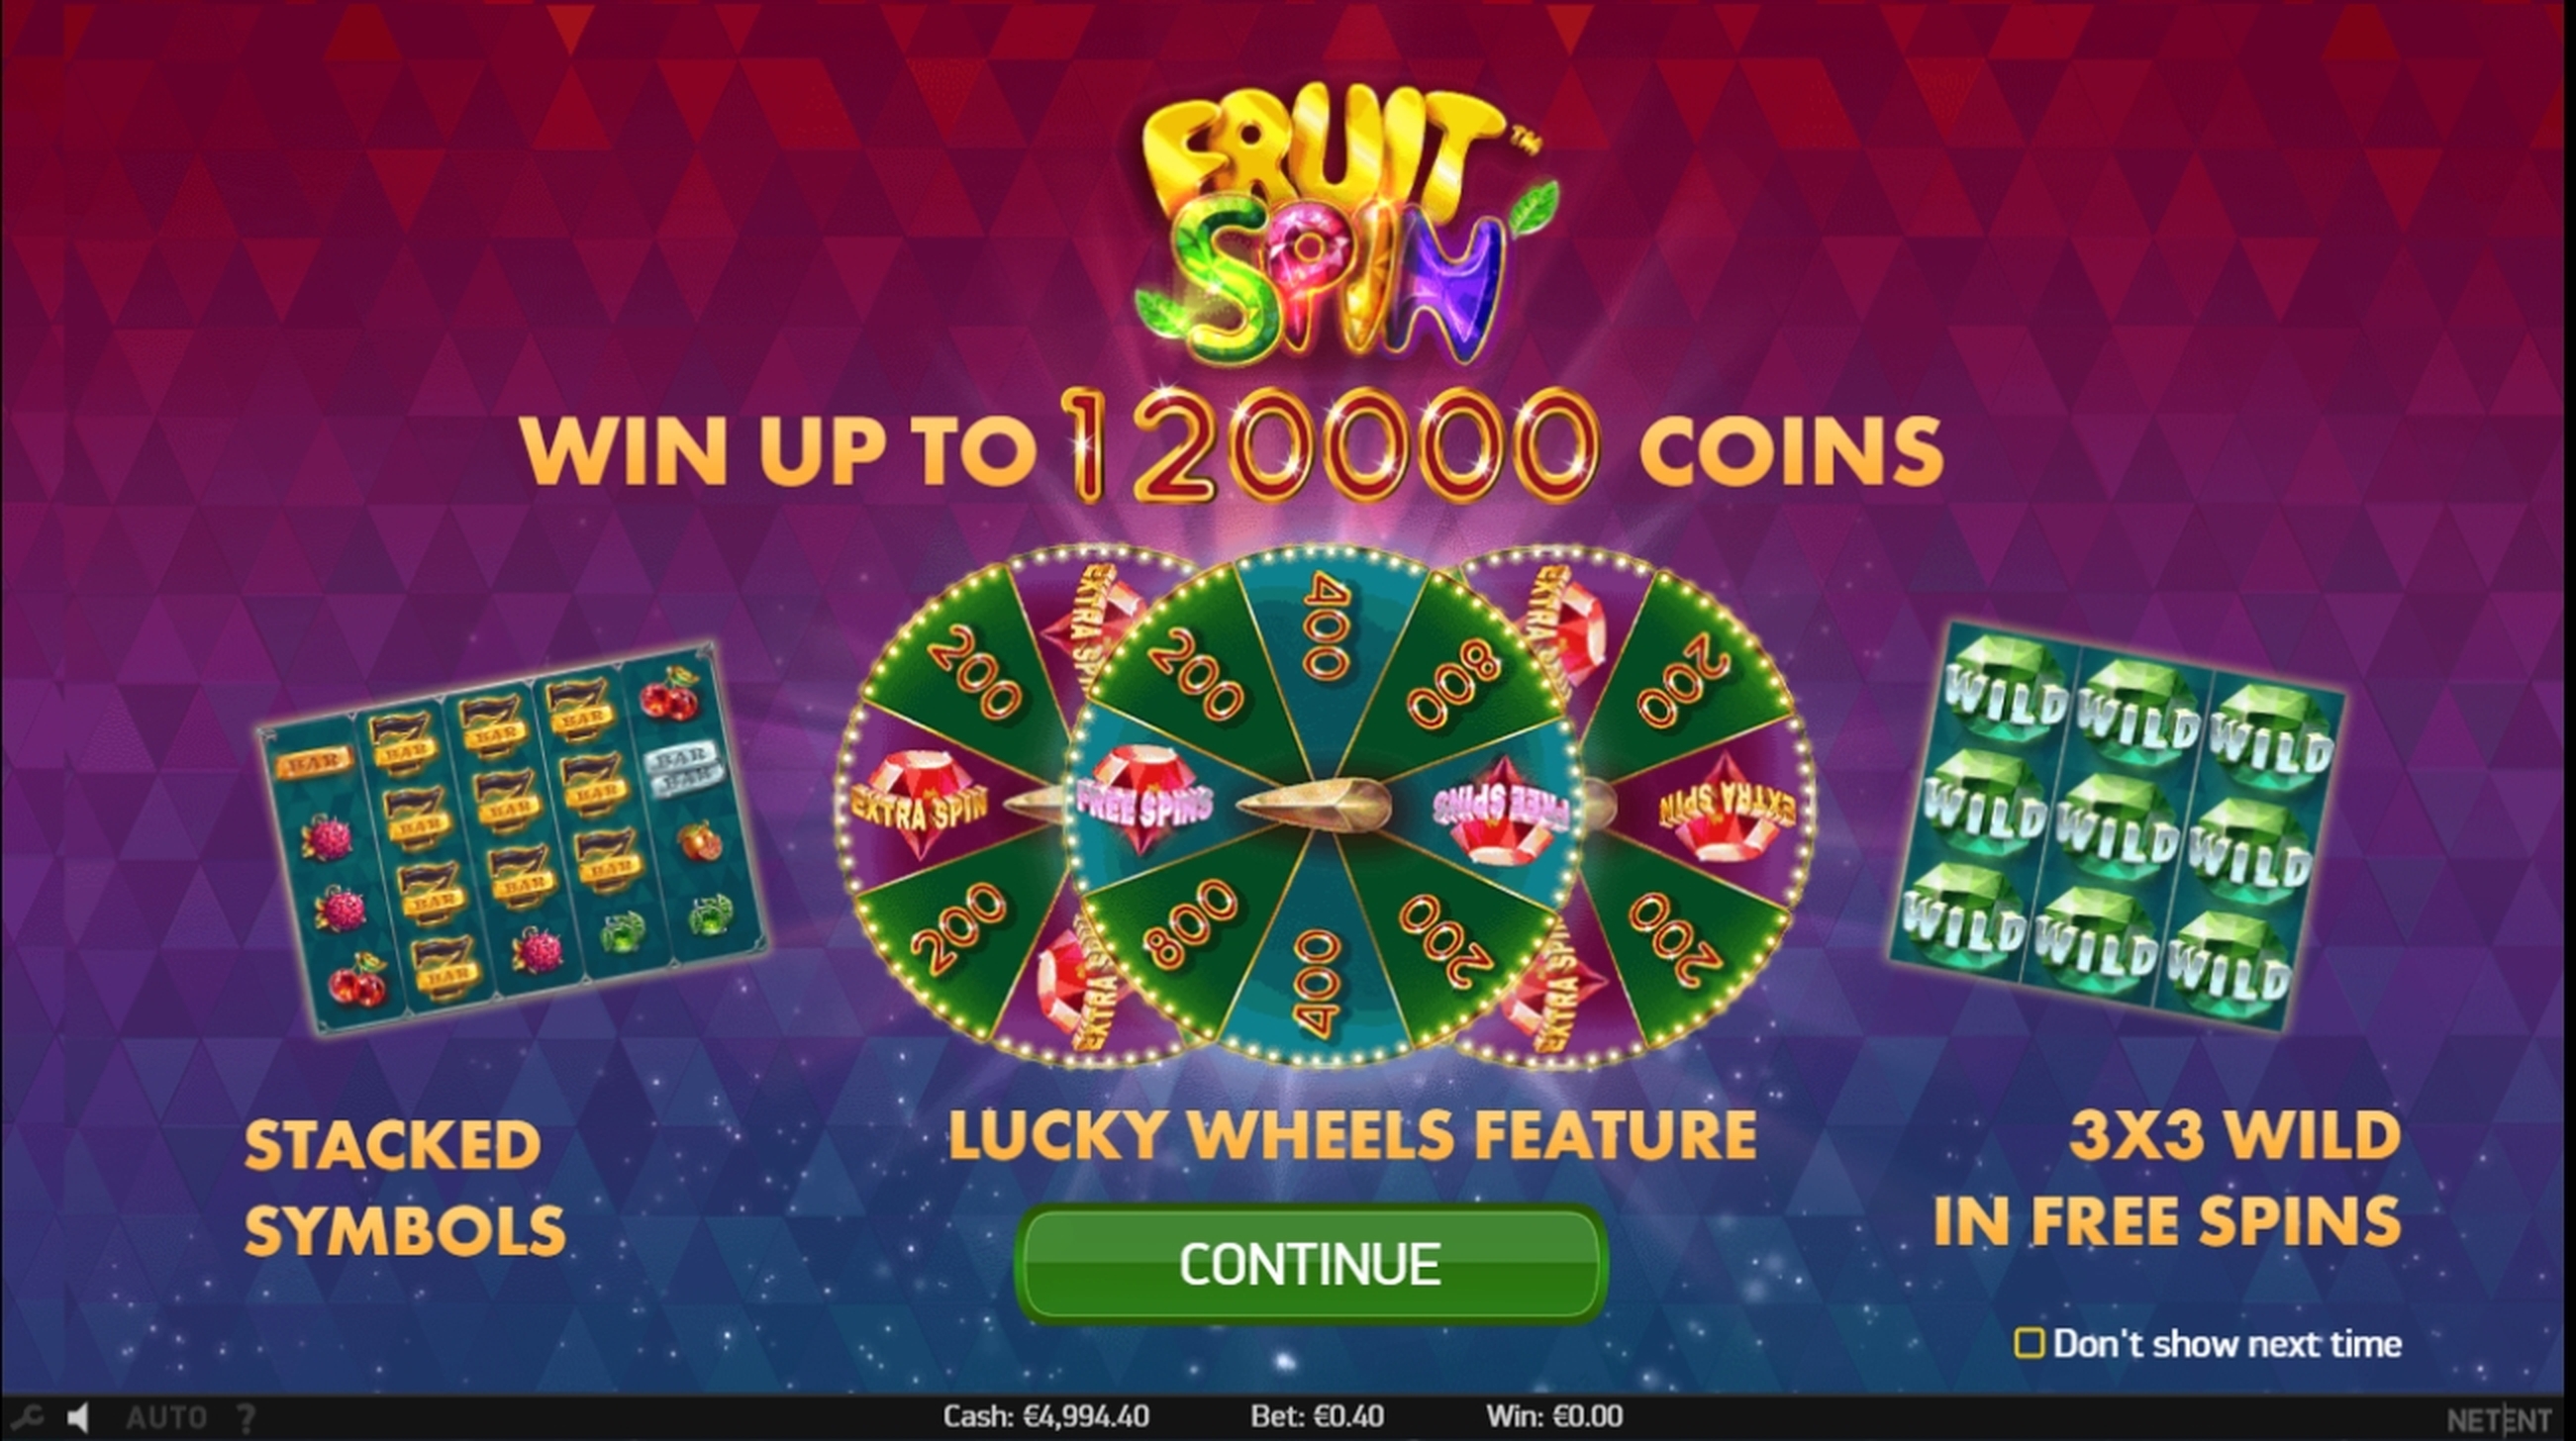 Play Fruit Spin Free Casino Slot Game by NetEnt